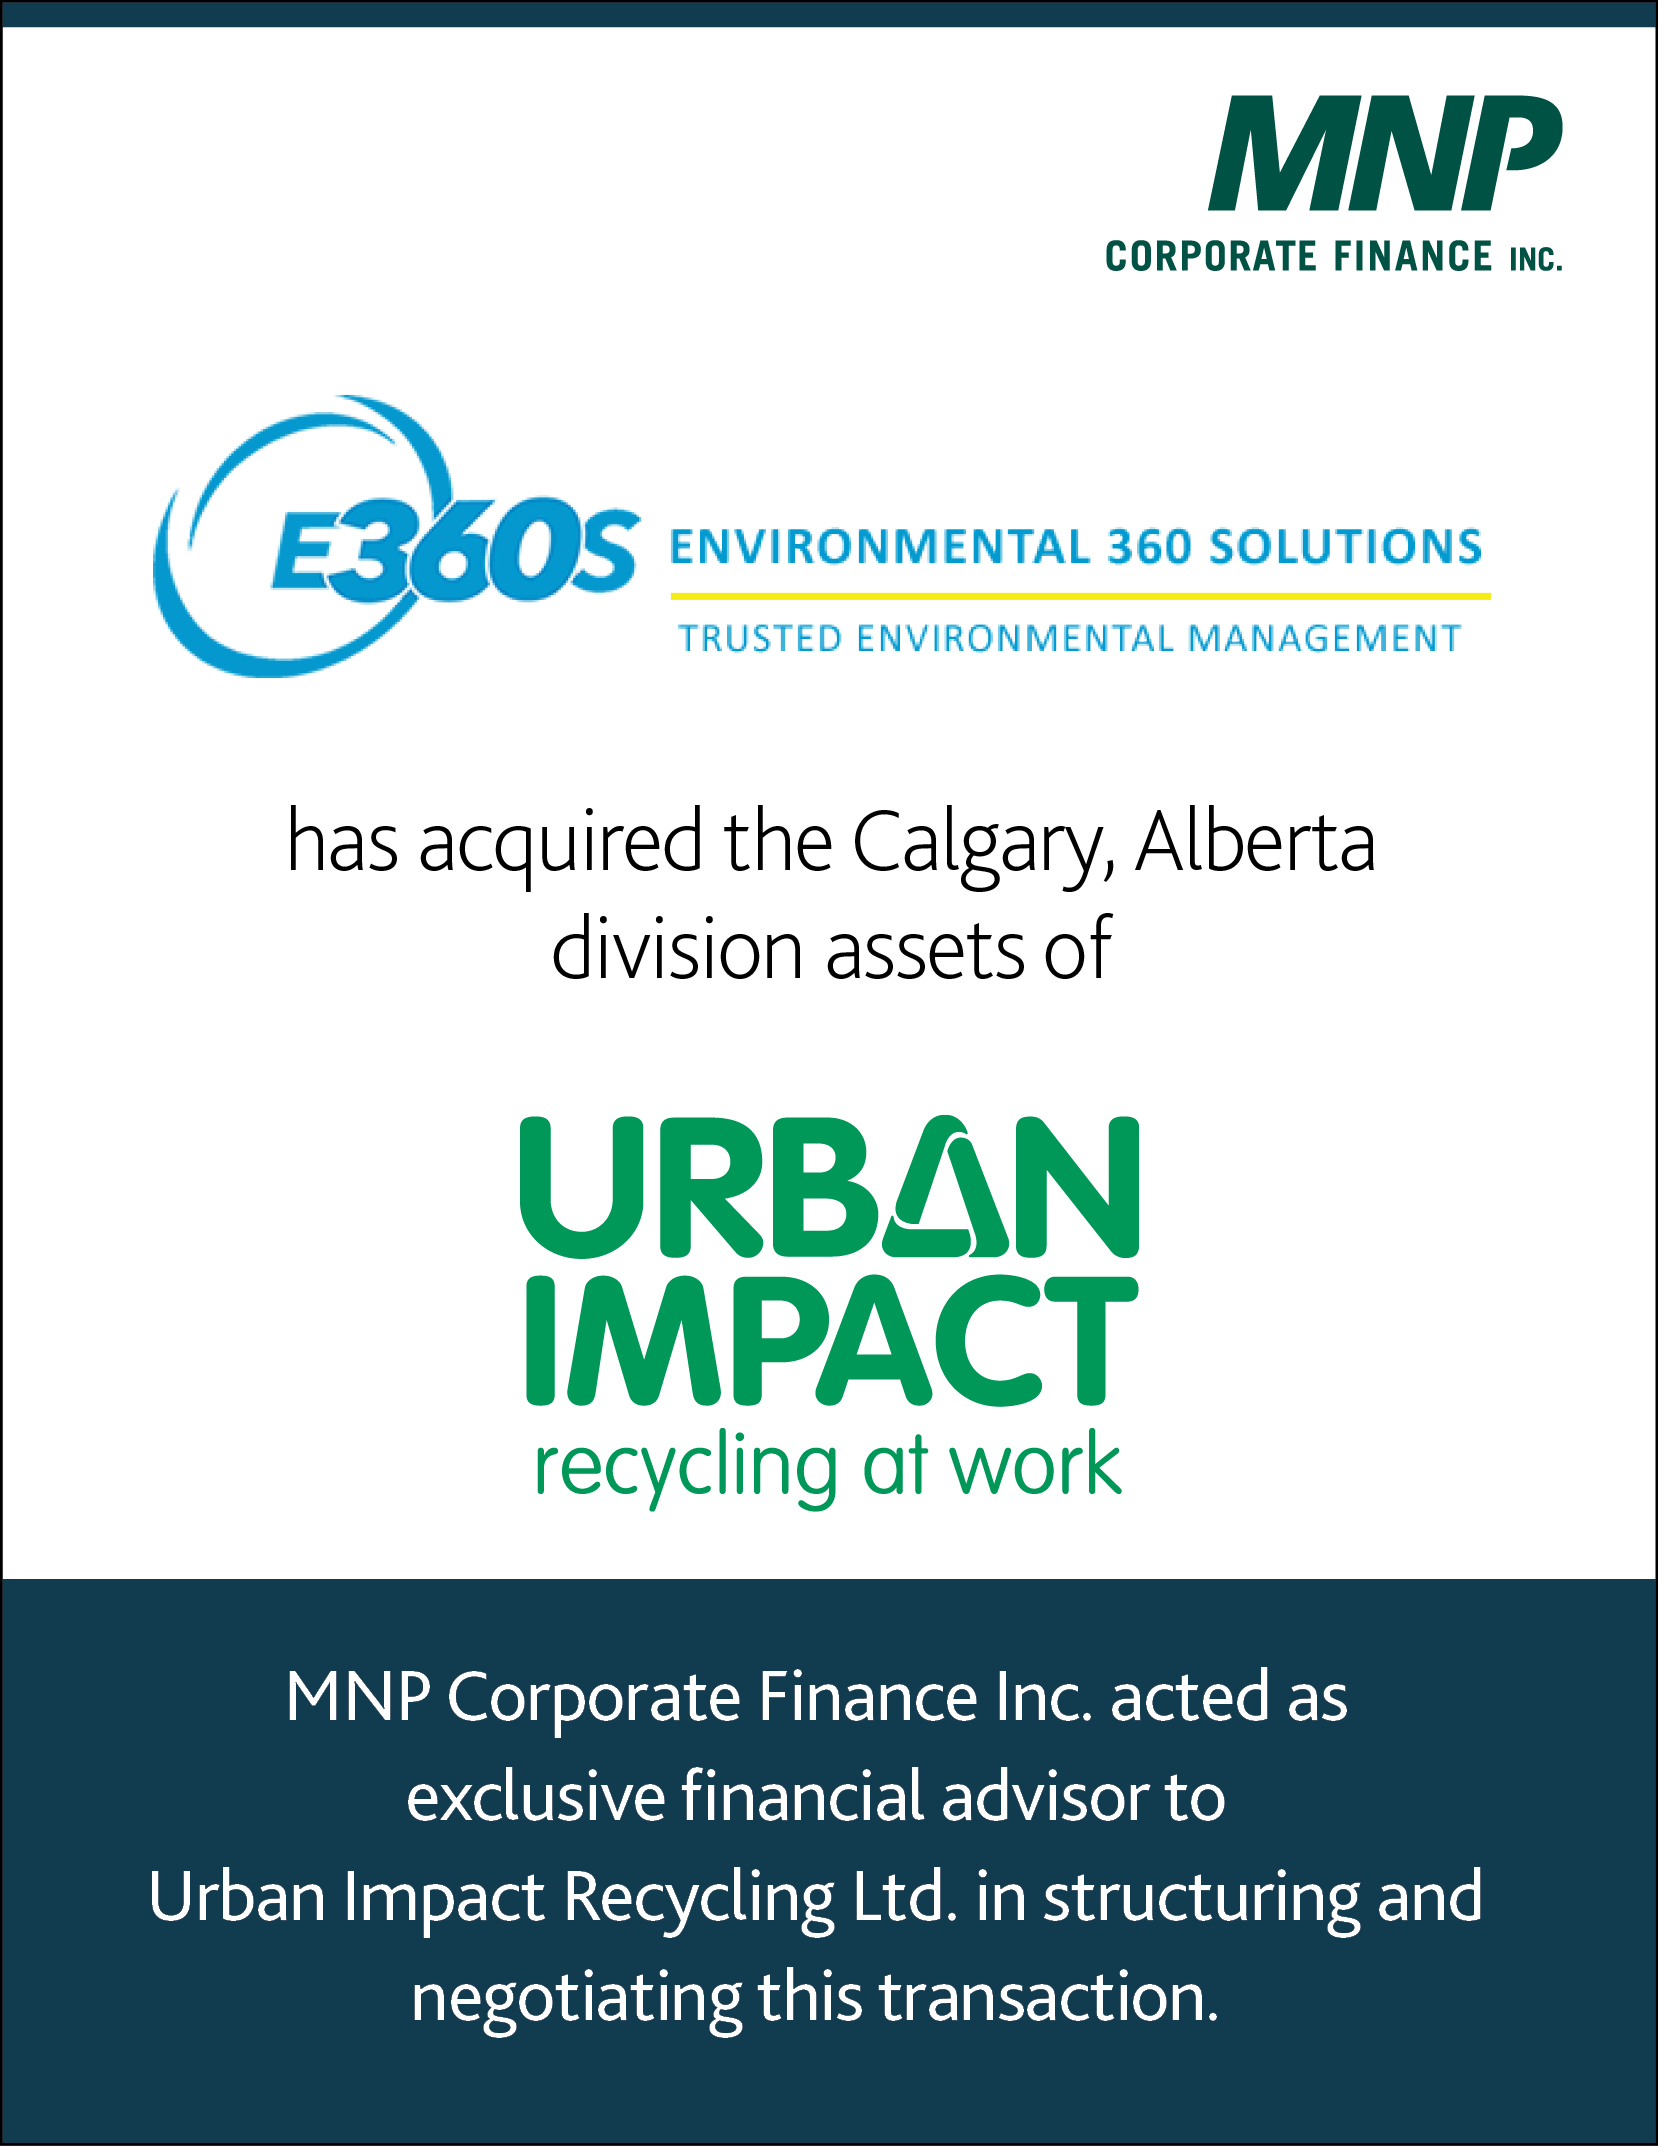 Environmental 360 Solutions Ltd. has acquired the Calgary, Alberta division assets of Urban Impact Recycling Ltd.